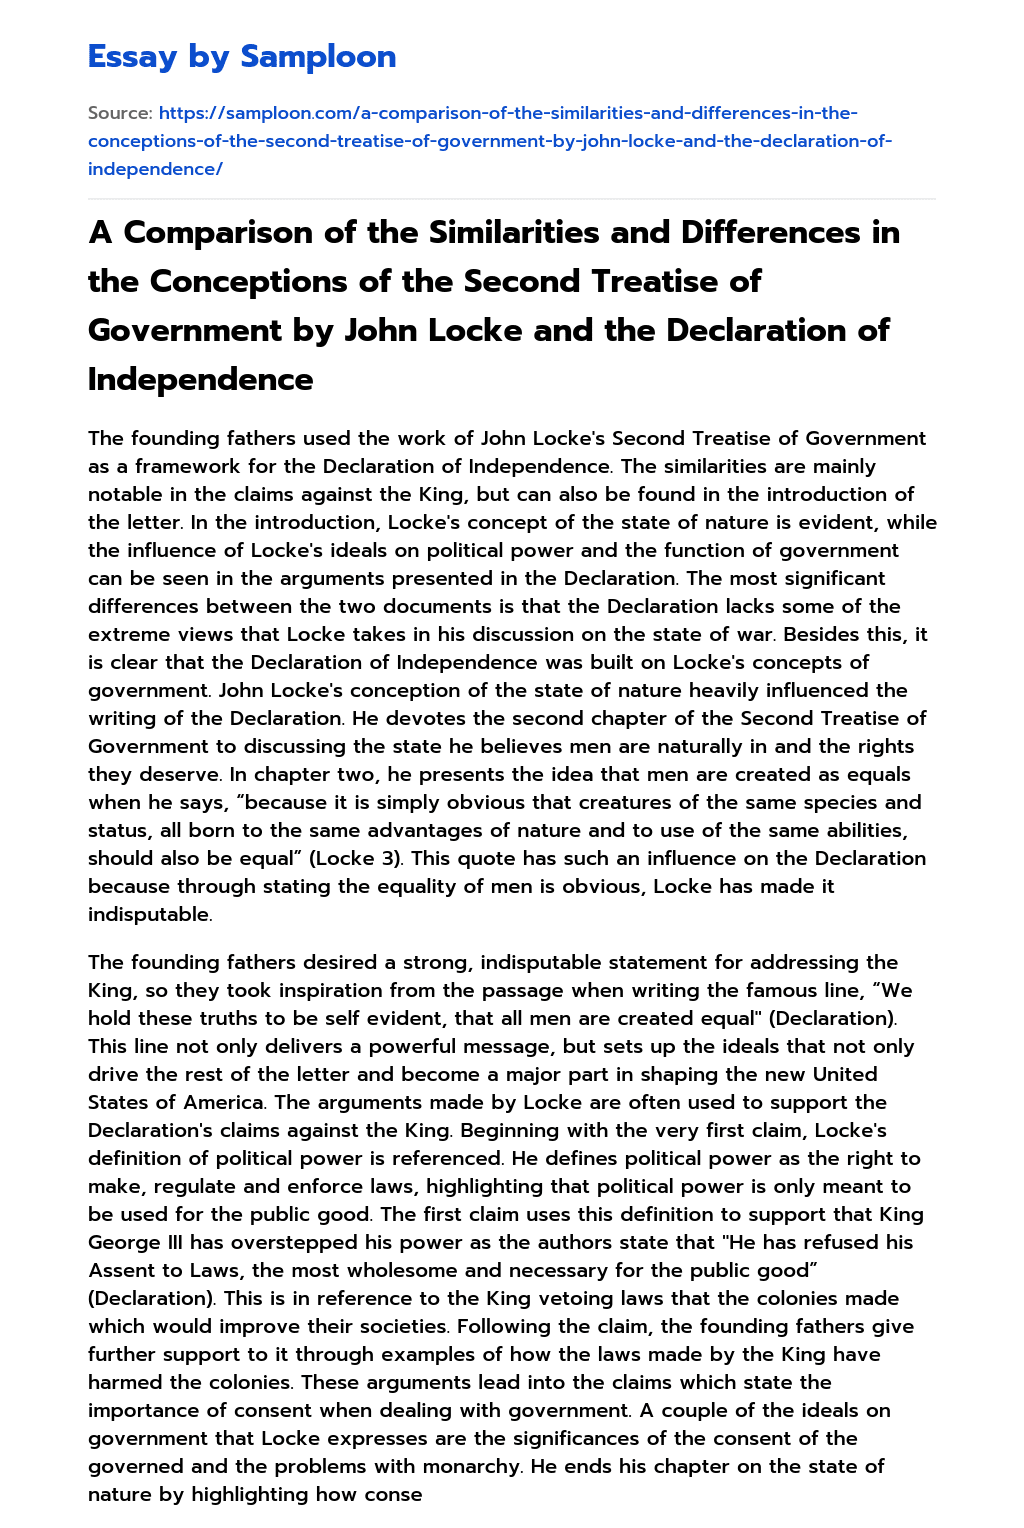 A Comparison of the Similarities and Differences in the Conceptions of the Second Treatise of Government by John Locke and the Declaration of Independence essay